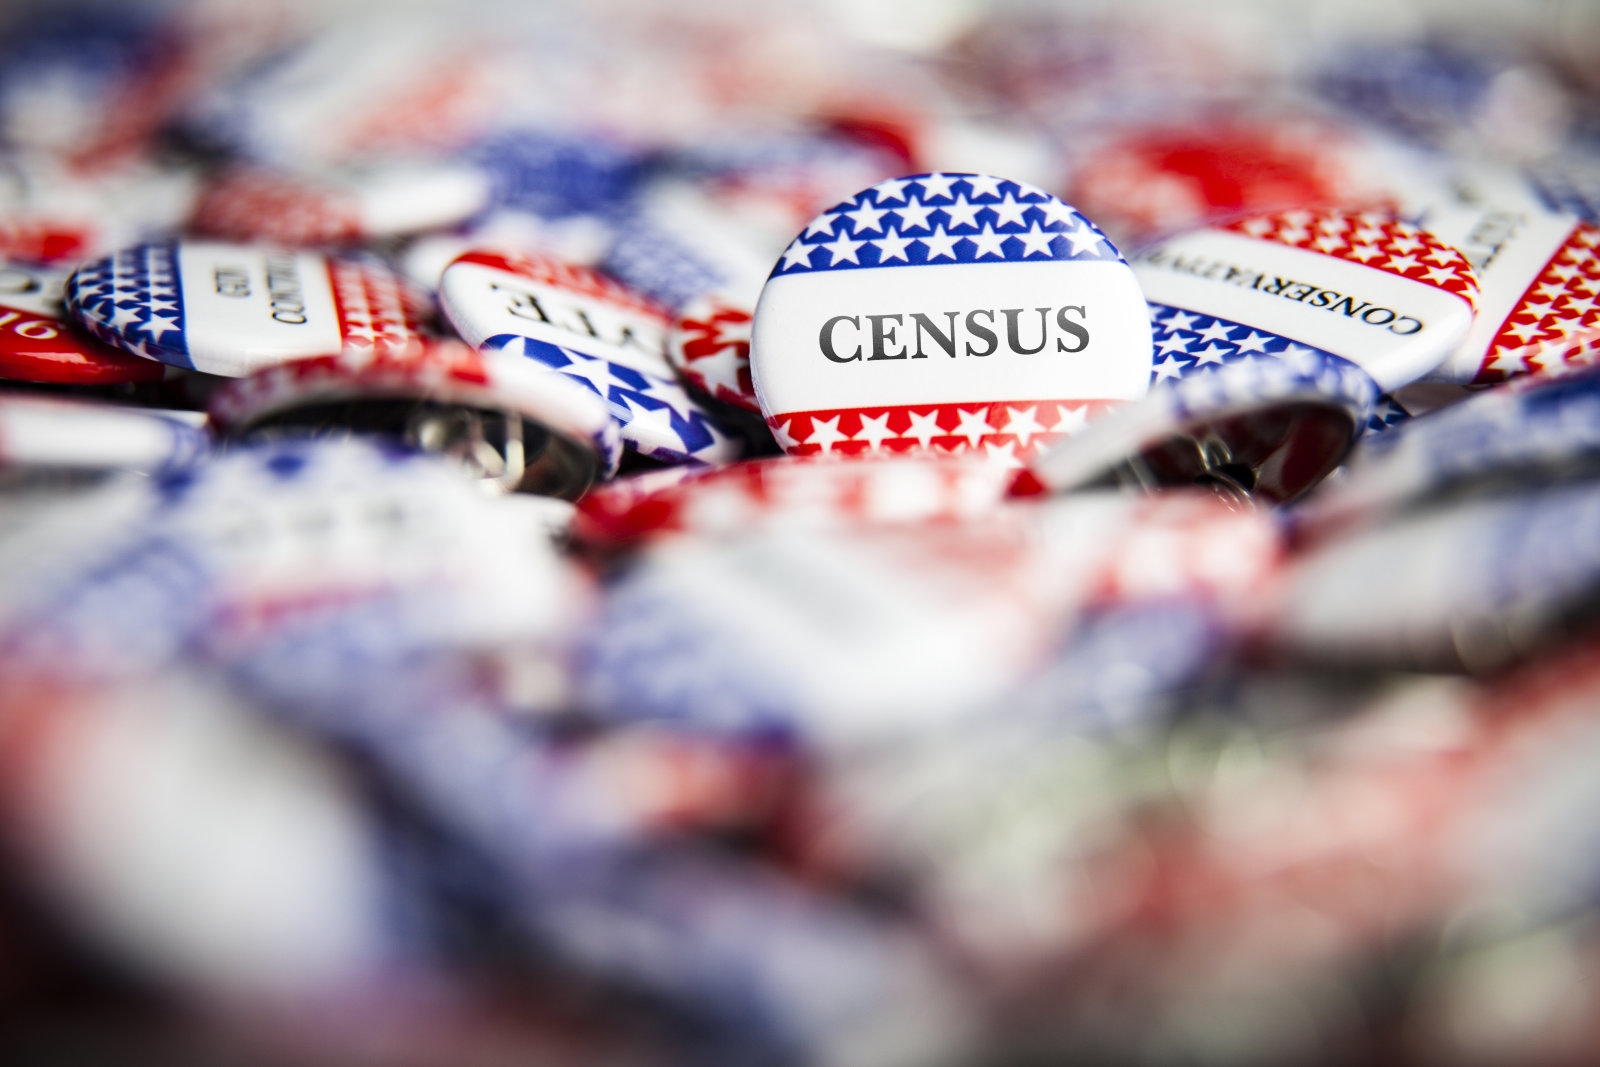 Facebook bans misinformation related to the 2020 US census | DeviceDaily.com